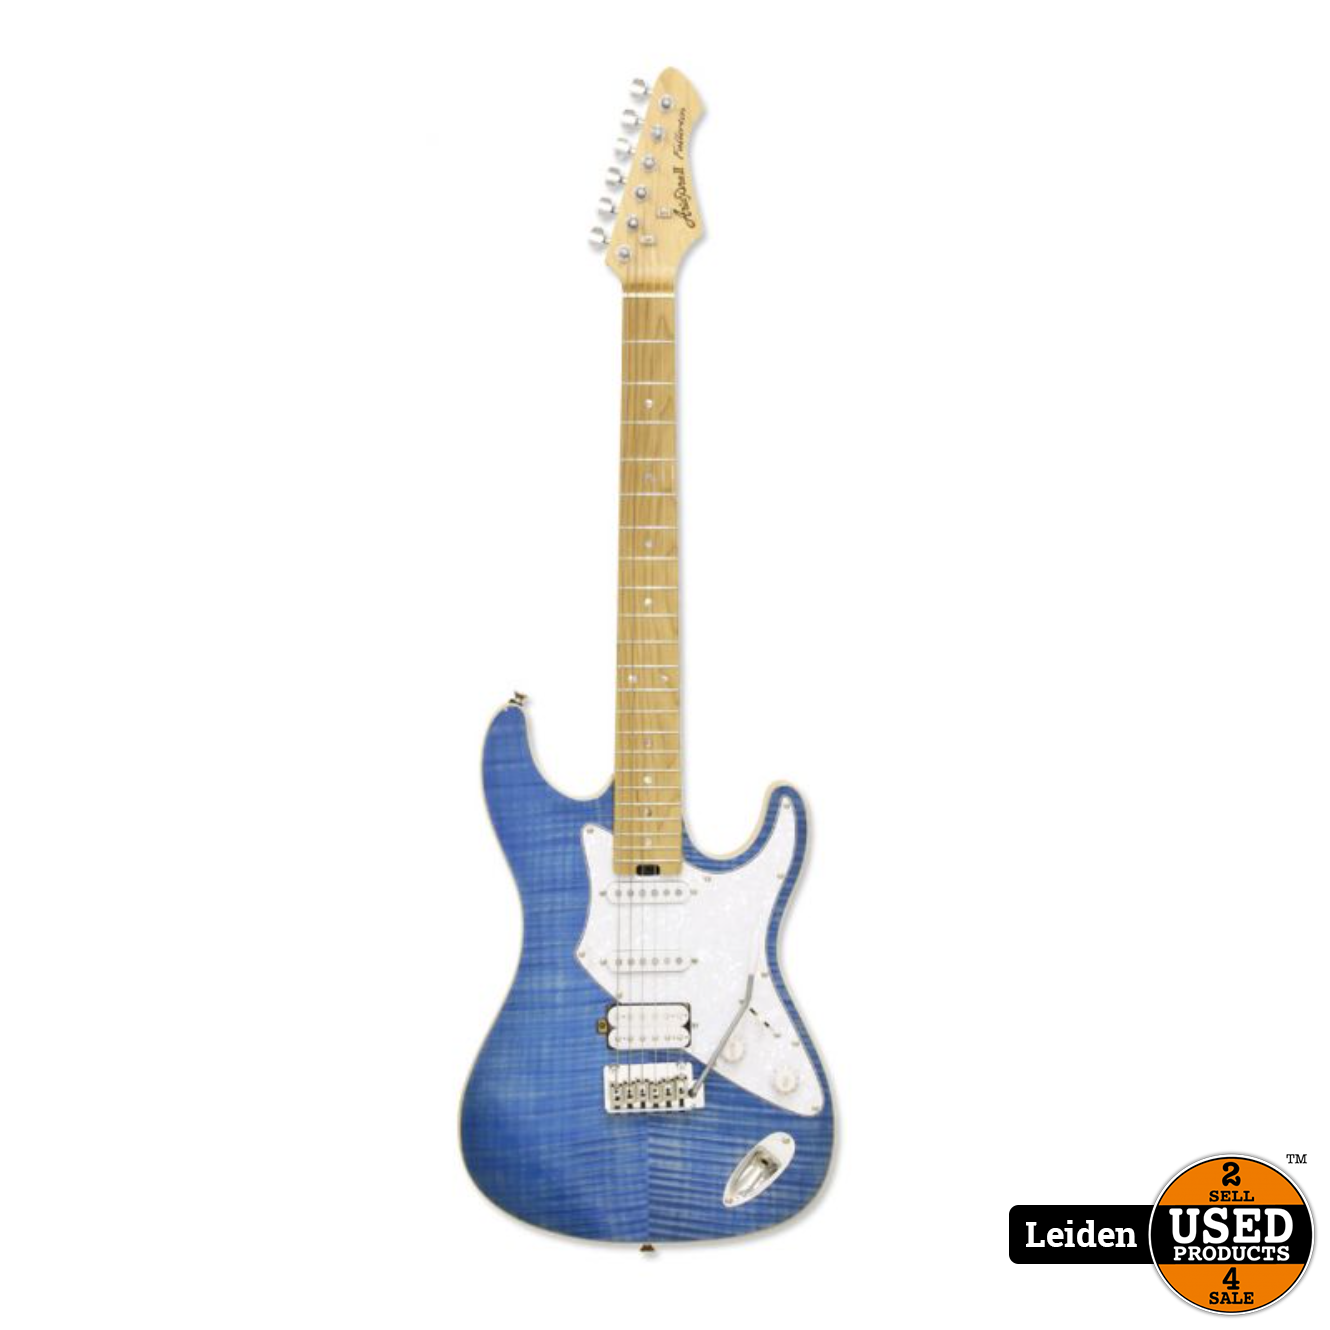 druiven lont Zegevieren Aria Electric Guitar Turquoise Blue 714-MK2 TQBL - Used Products Leiden